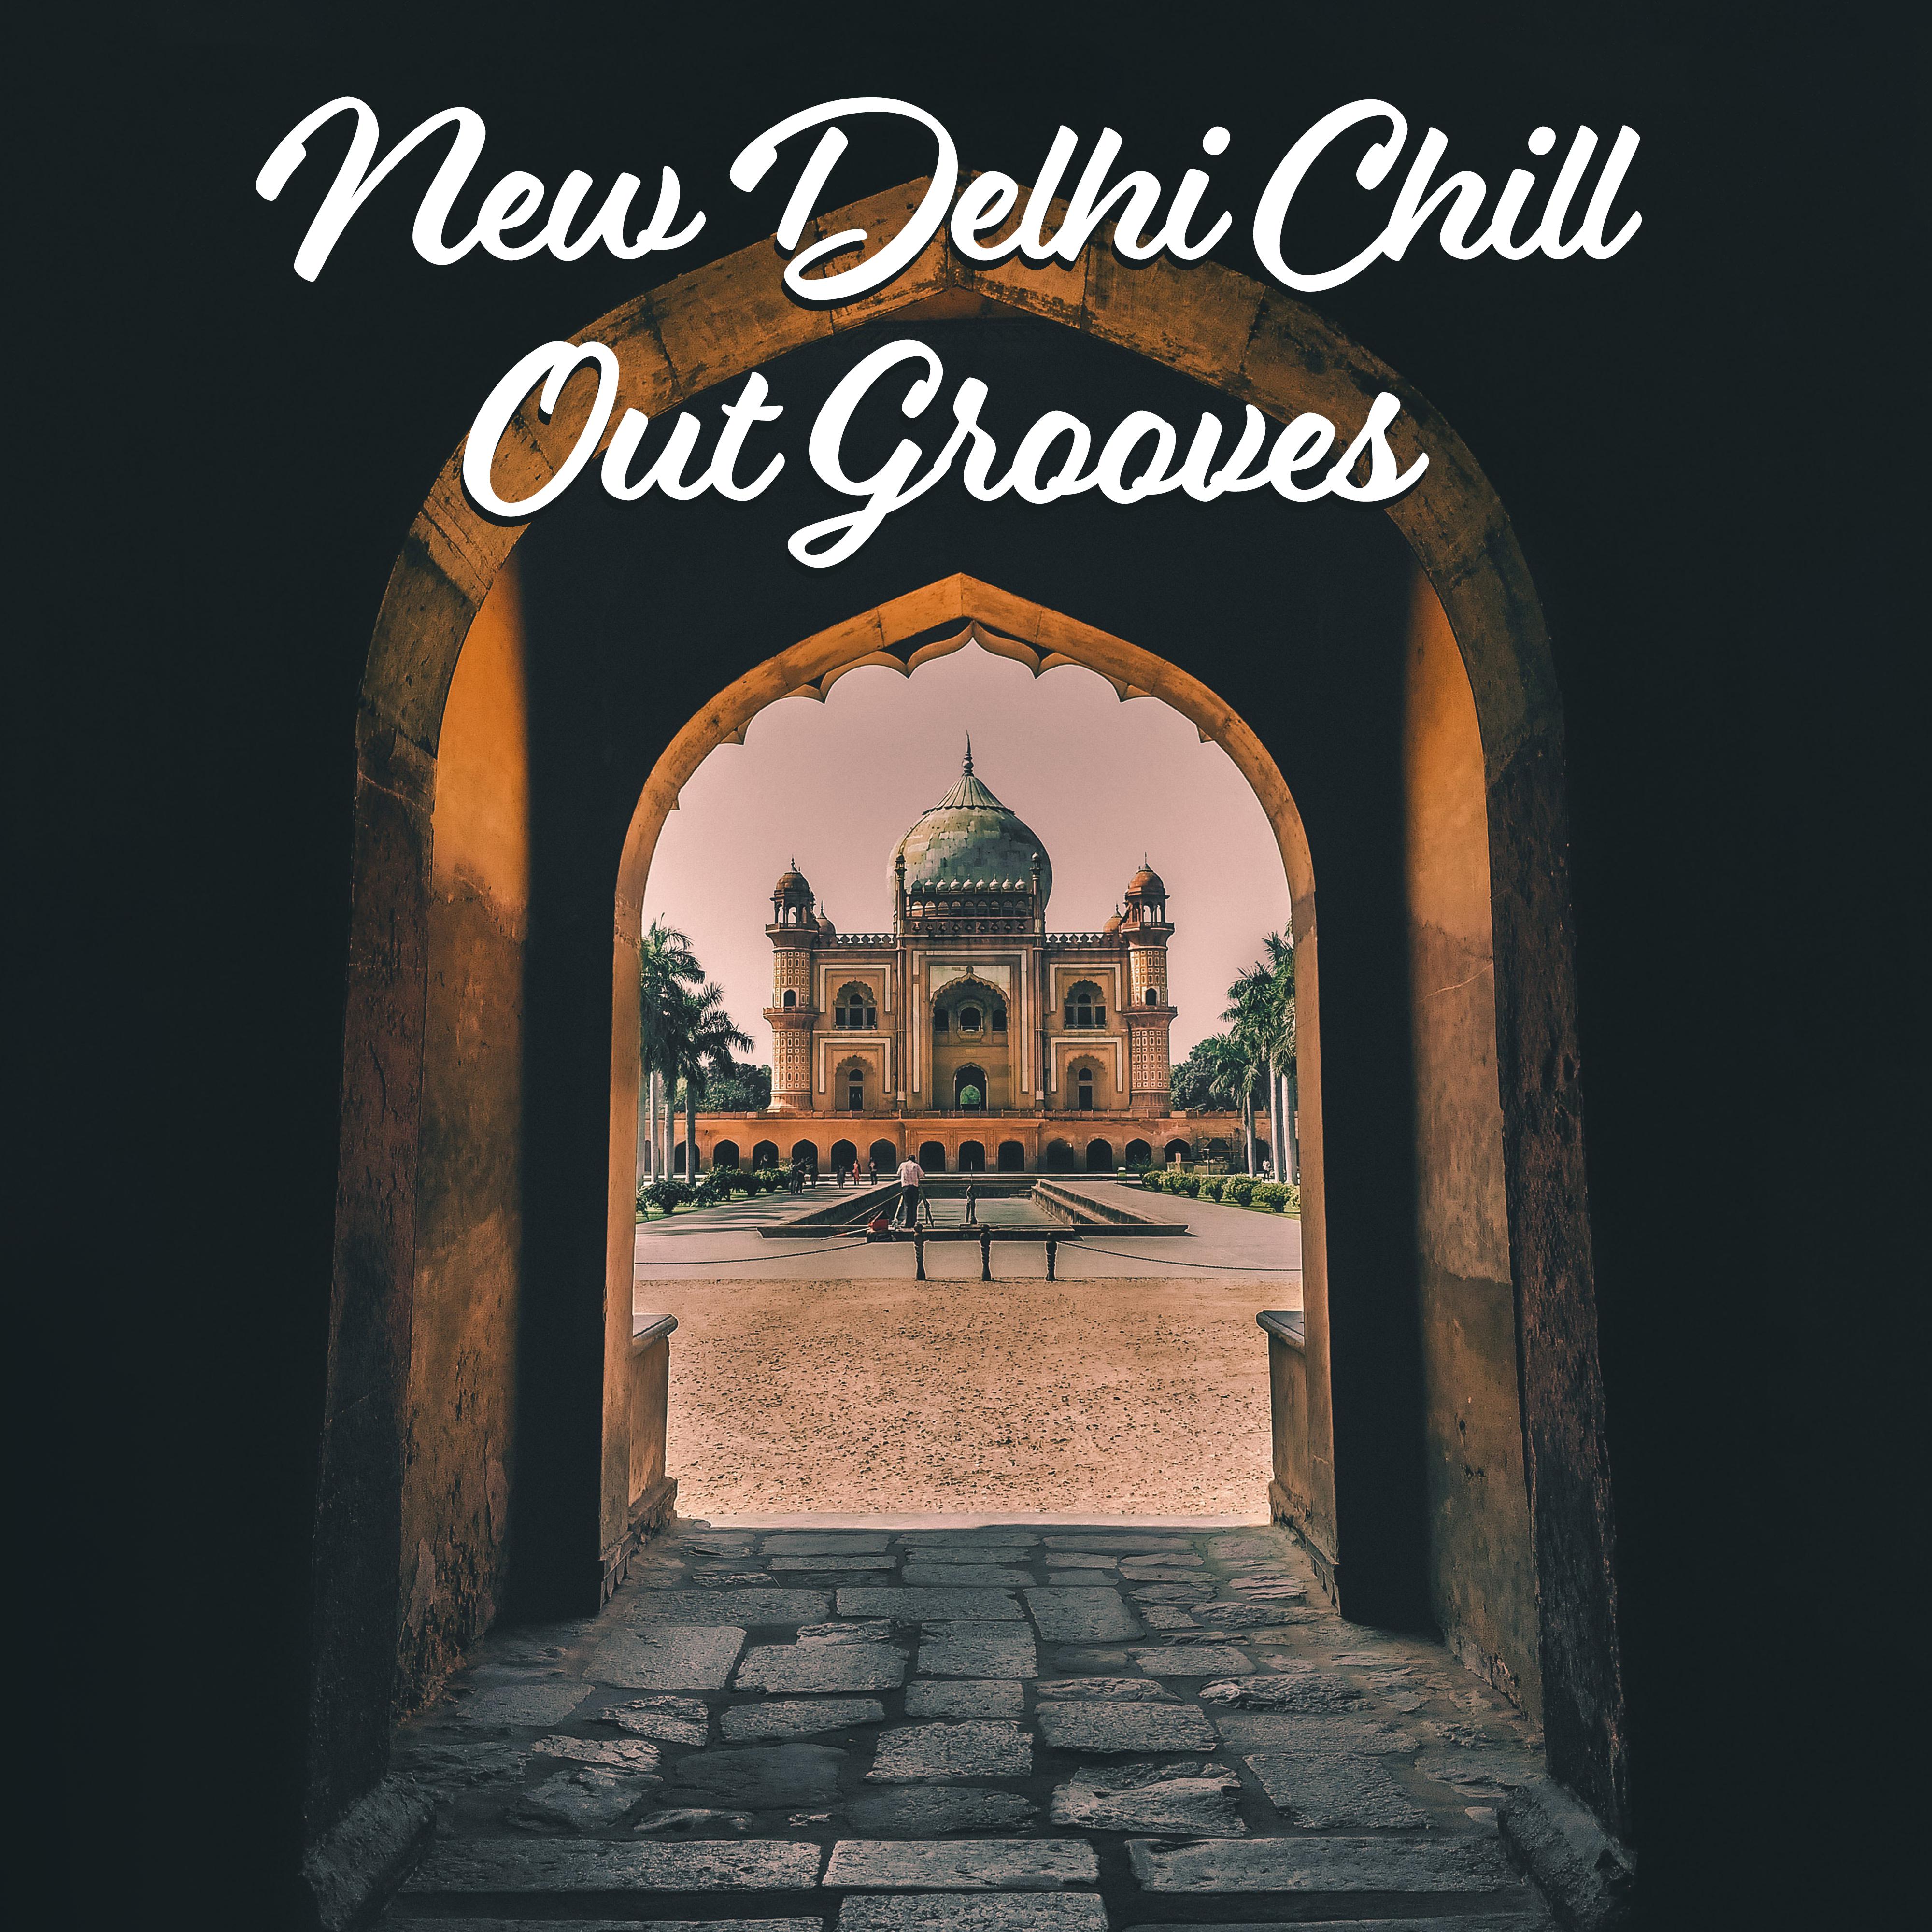 New Delhi Chill Out Grooves